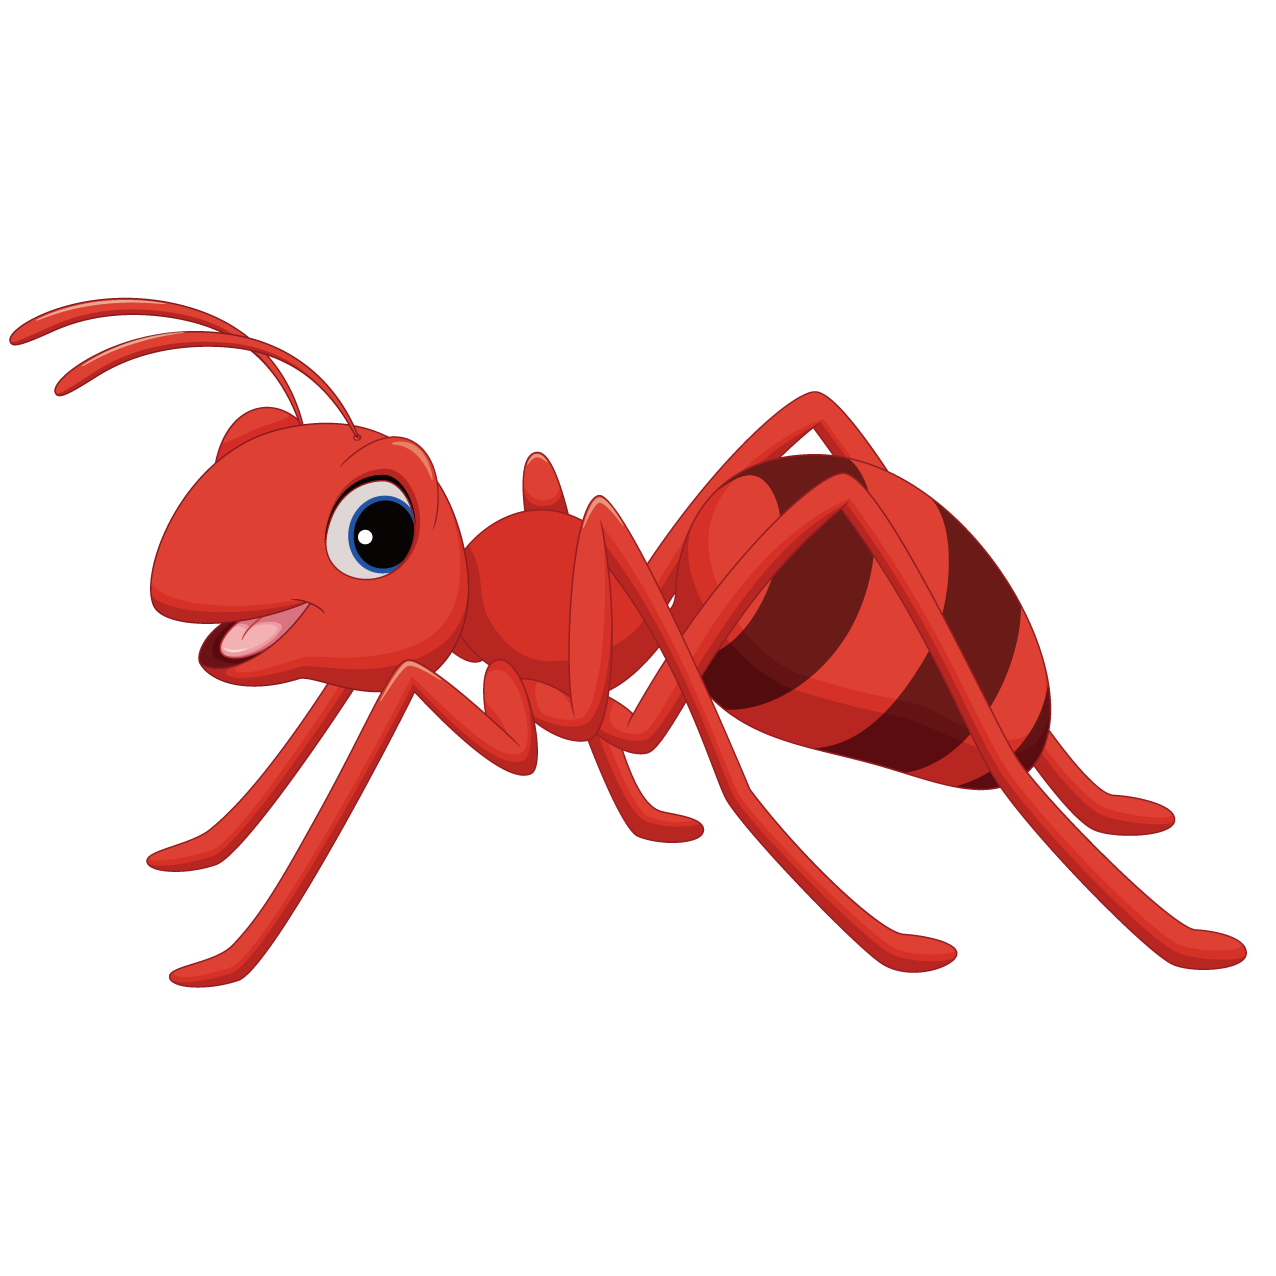 Ant Cartoon Clip Art Red Ants Png Download 1276 1276 Free Transparent Ant Png Download Clip Art Library